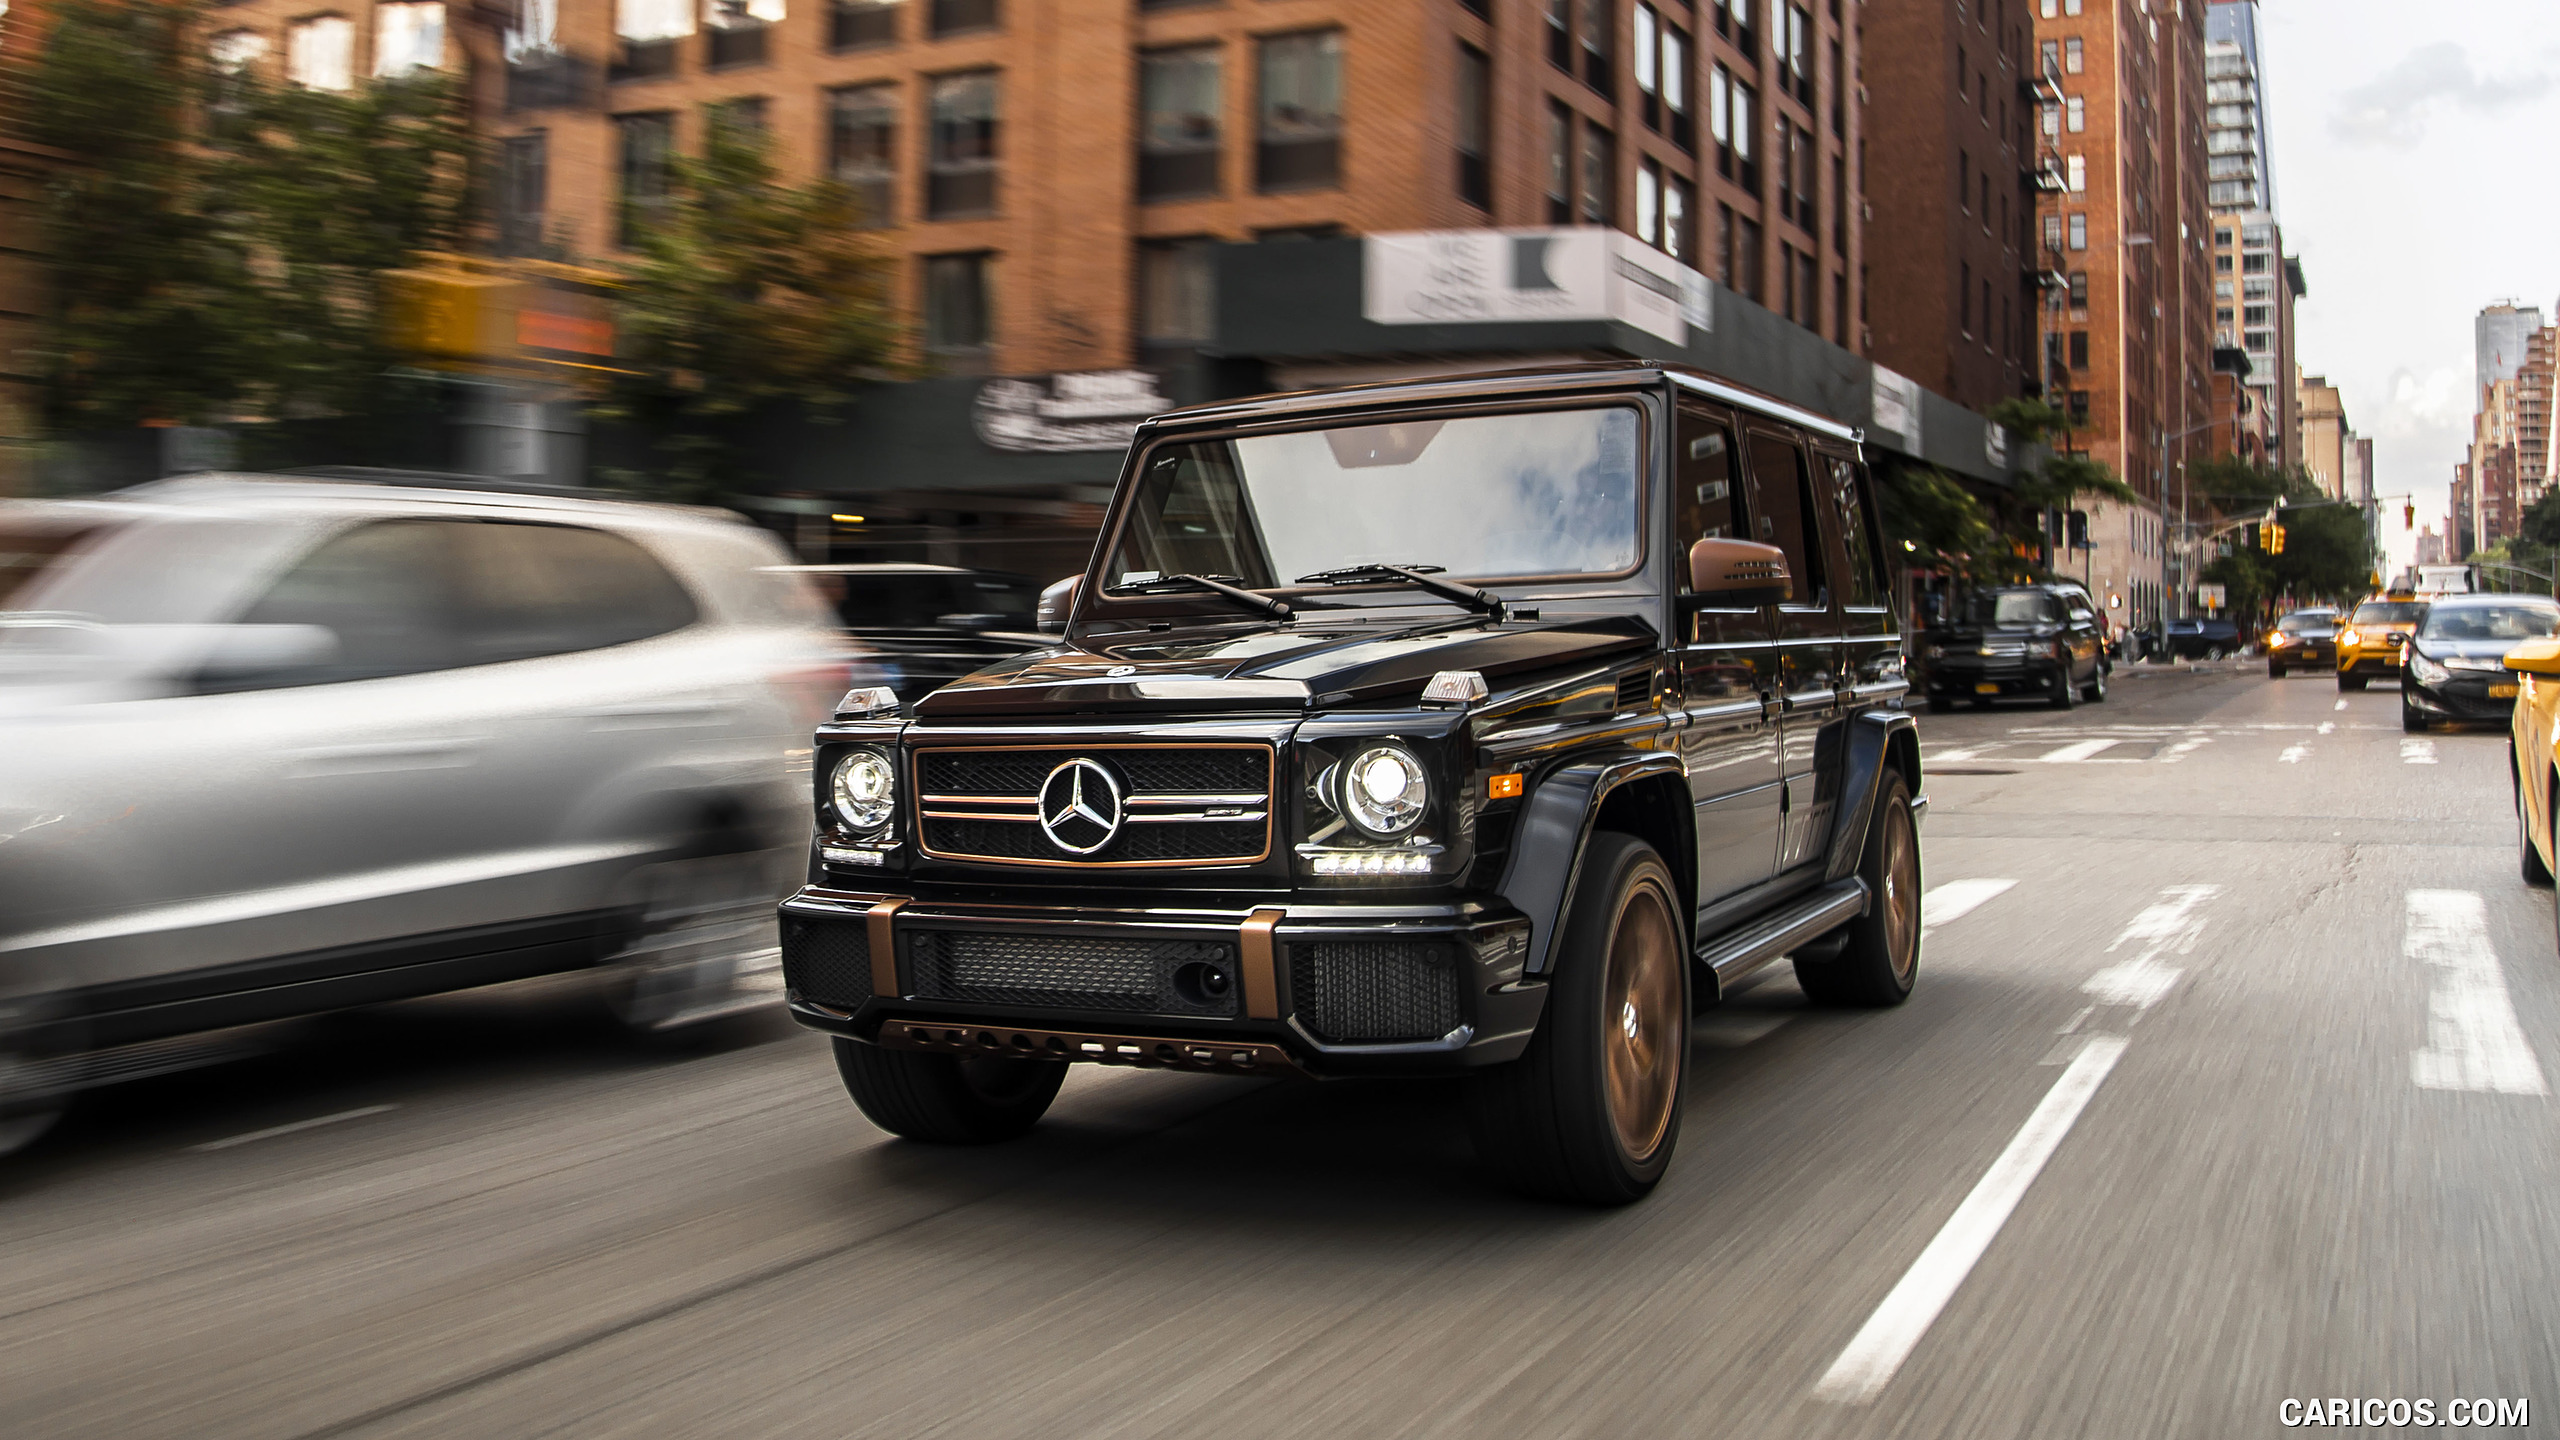 2018 Mercedes-AMG G65 Final Edition (US-Spec) - Front Three-Quarter, #25 of 70